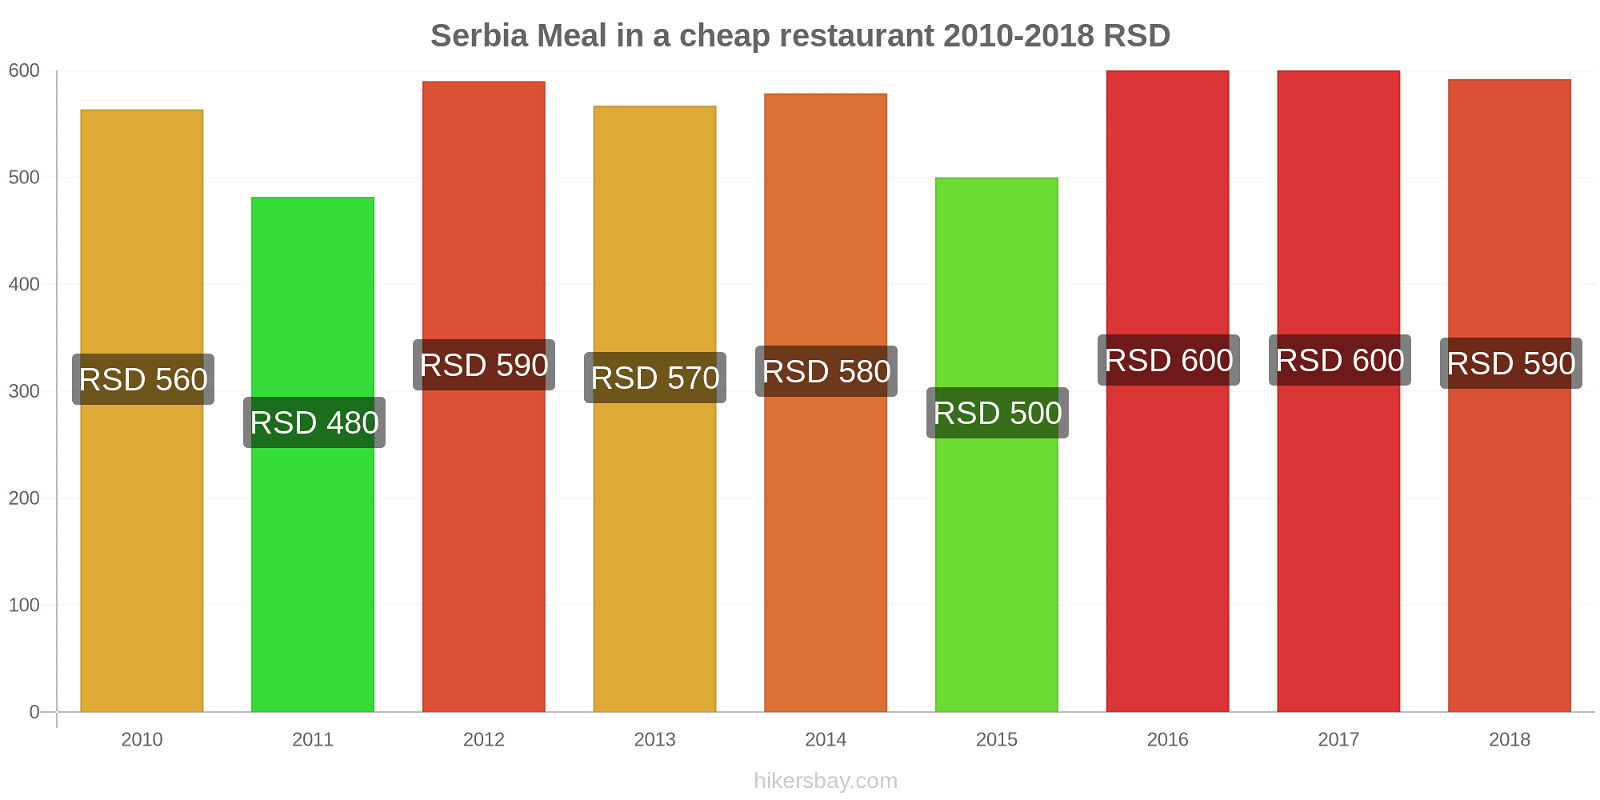 Serbia price changes Meal in a cheap restaurant hikersbay.com